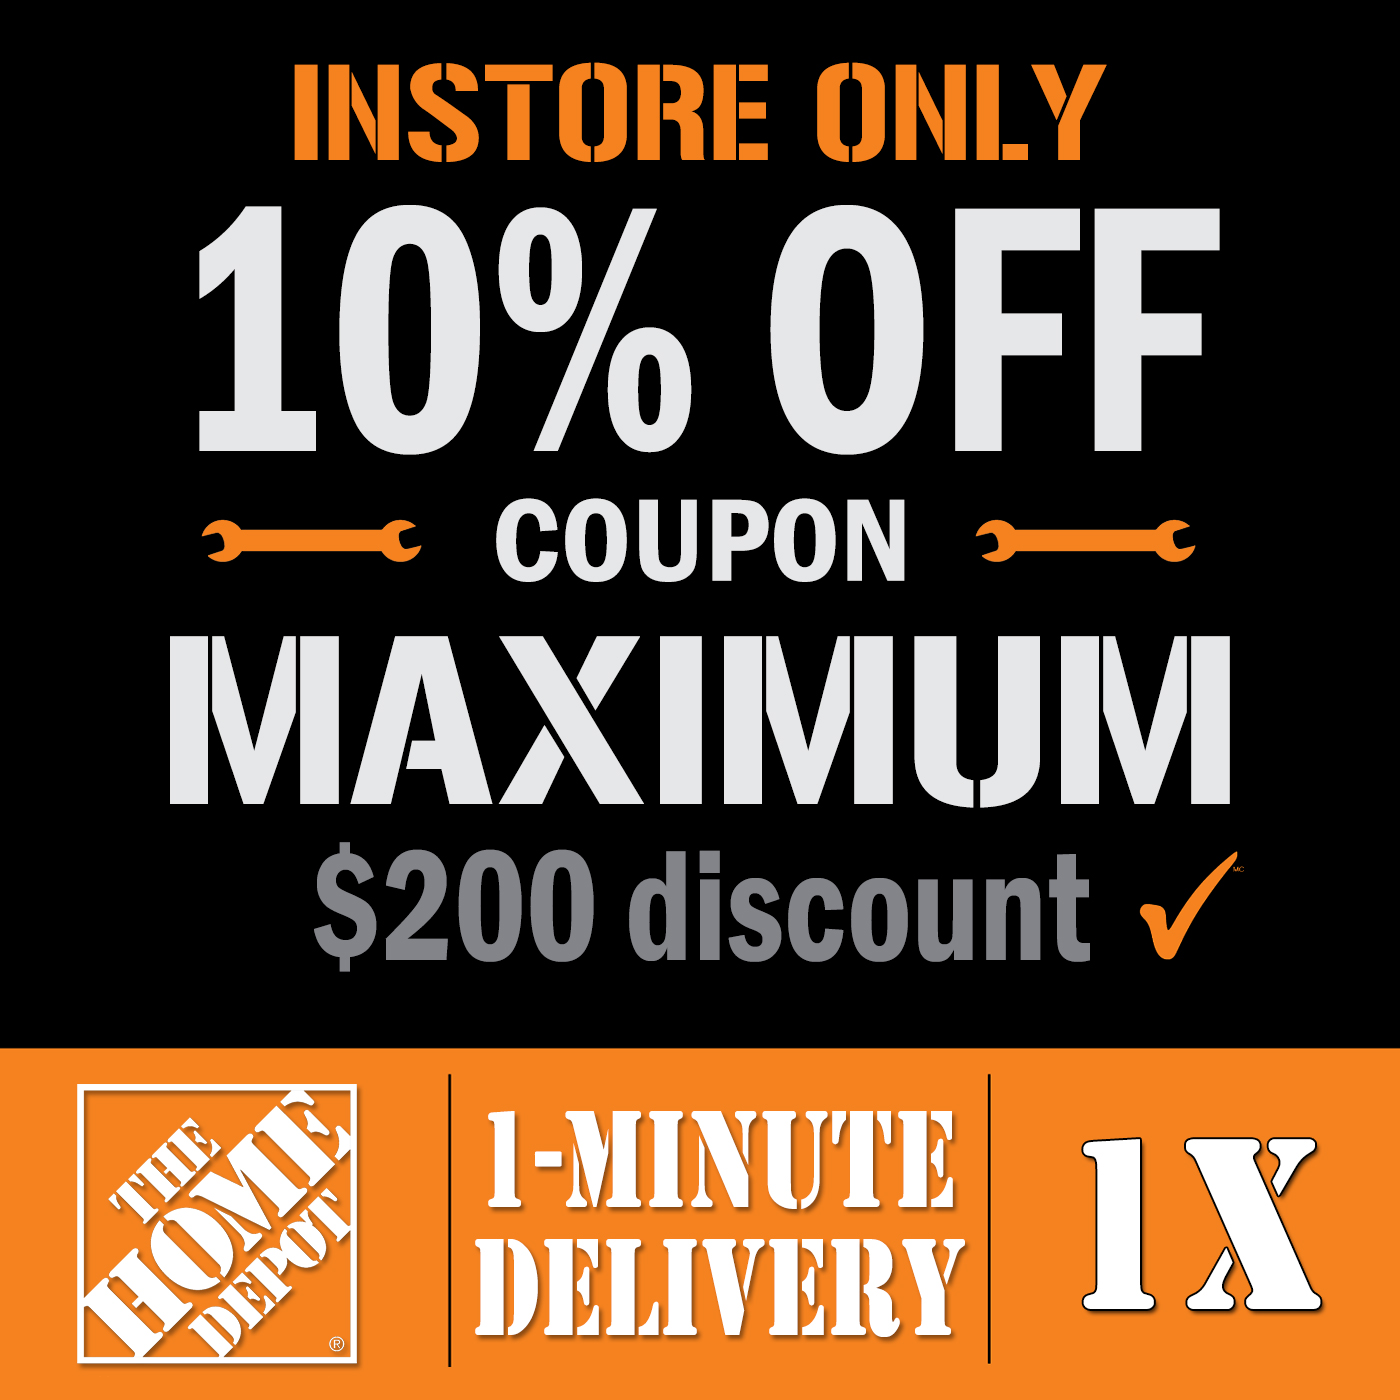 Home Depot Coupon Save 10 off instore orders. Instant Email Delivery